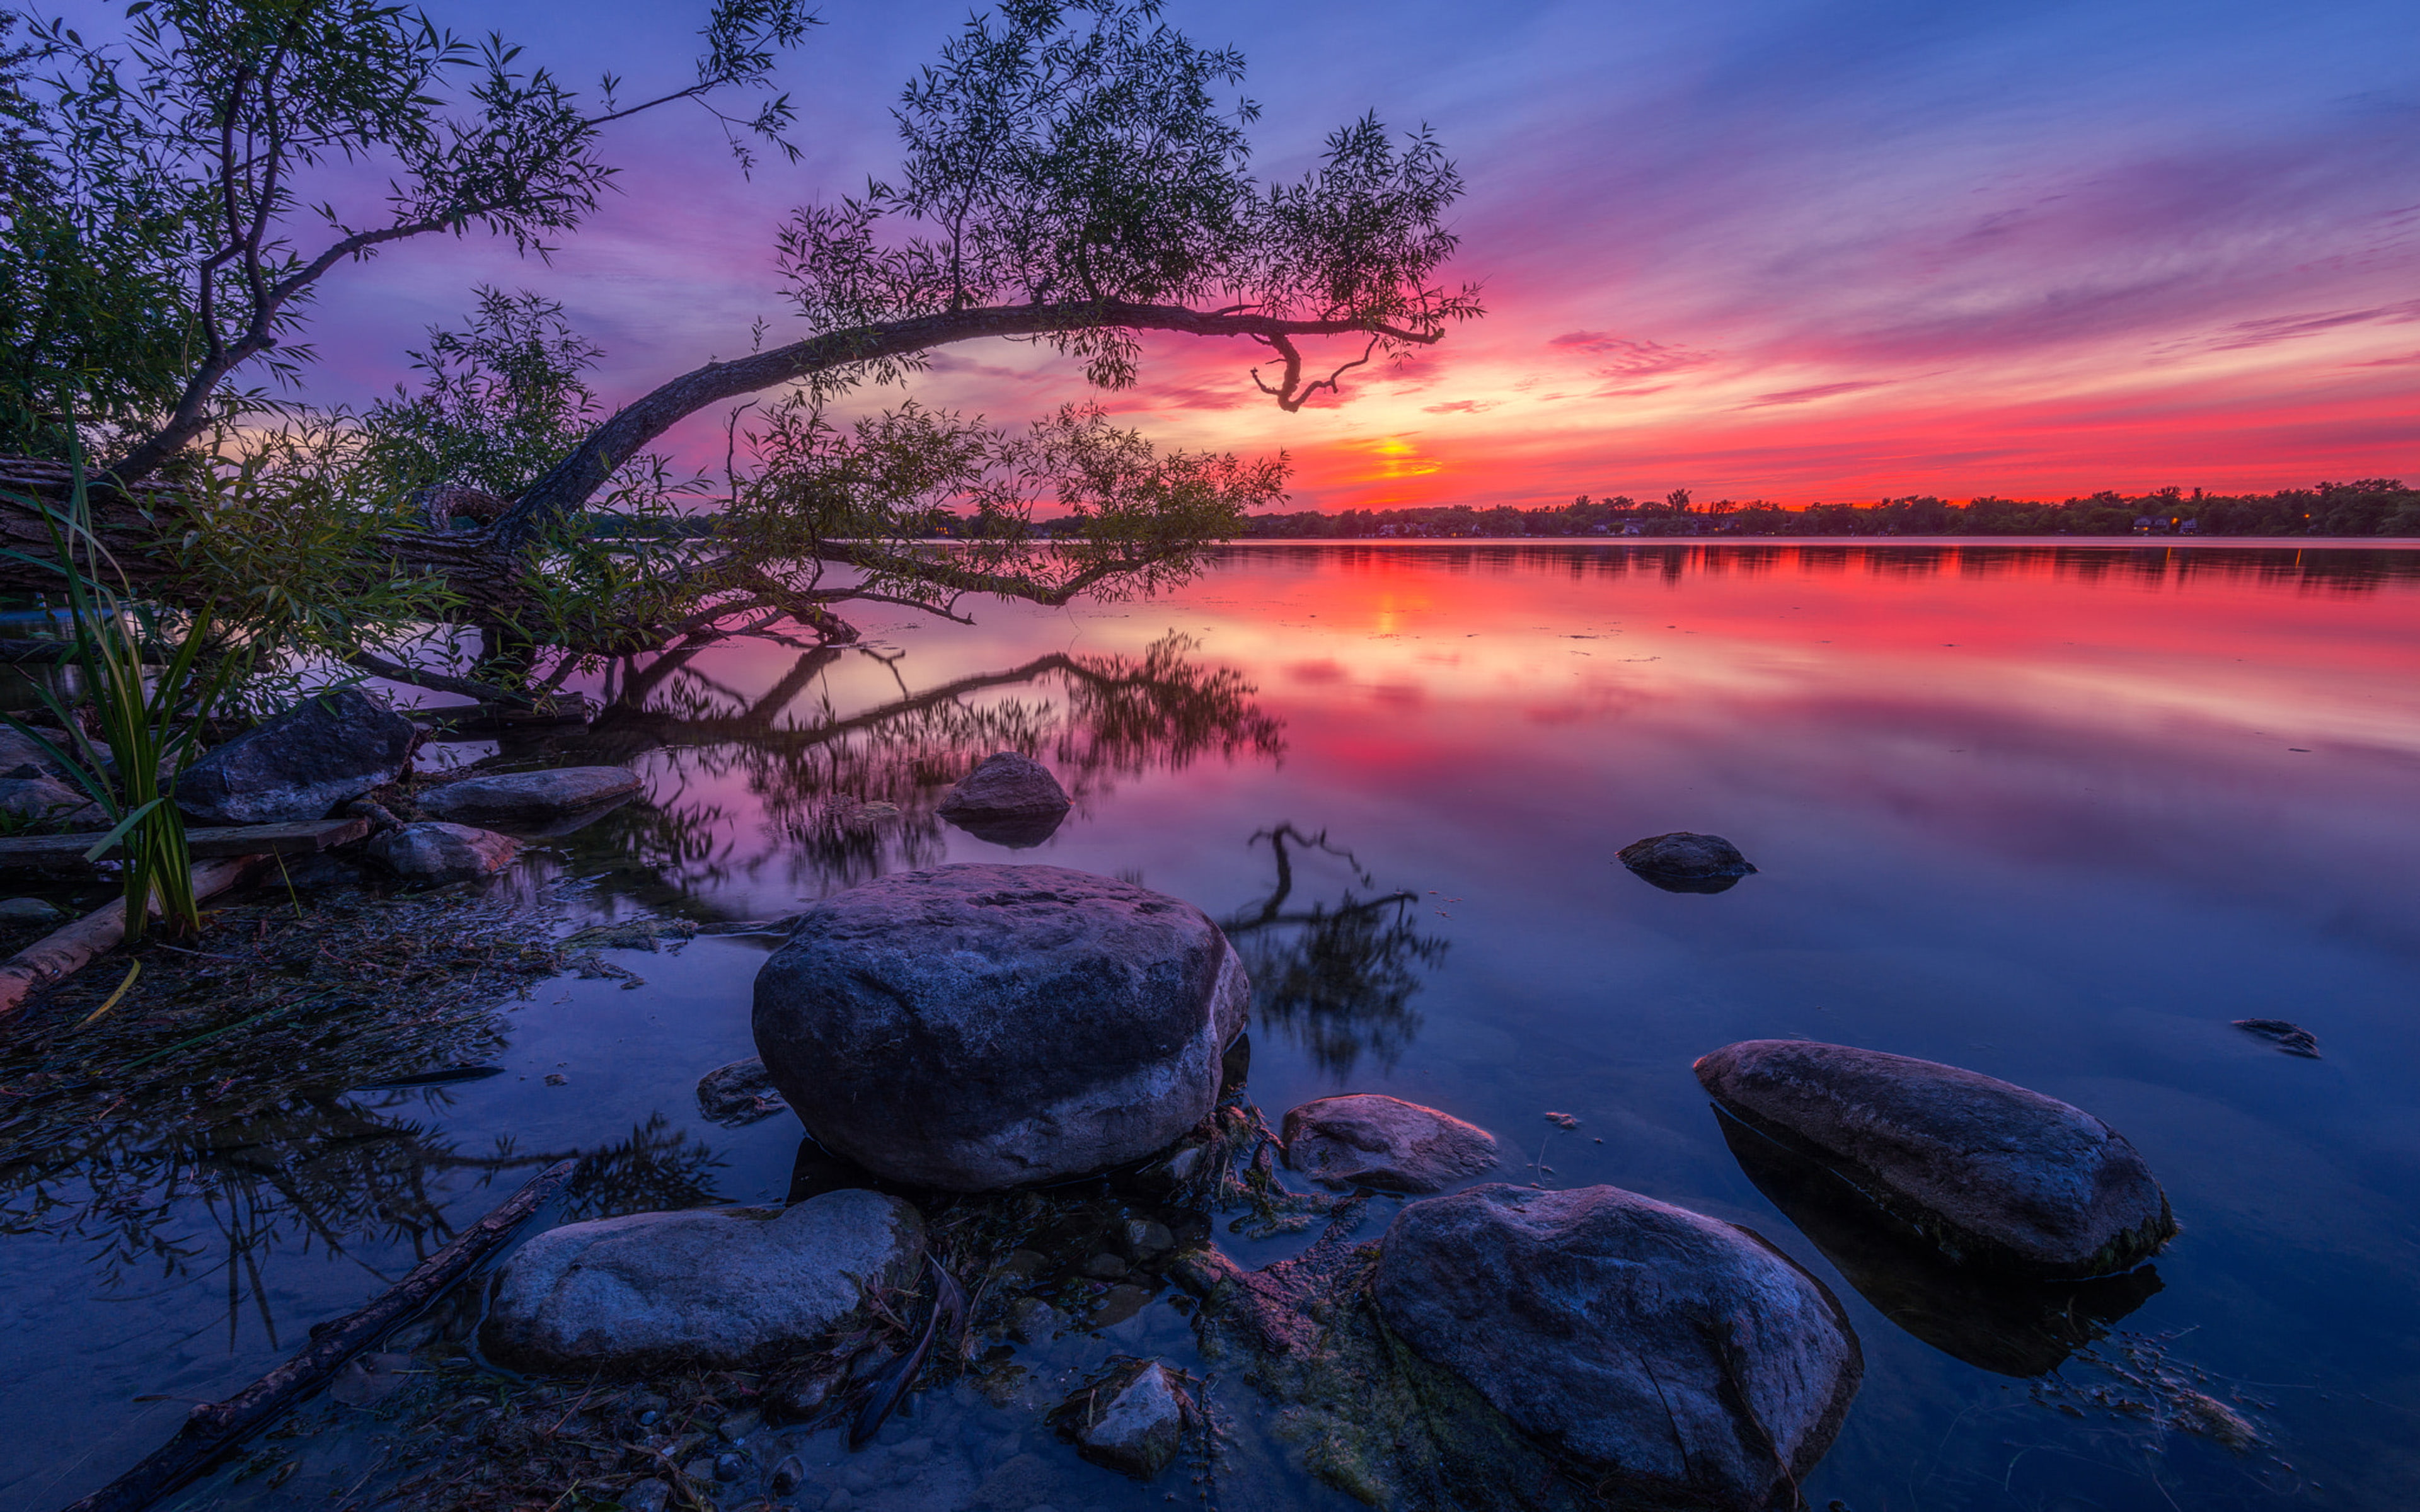 Wilcox Lake Ontario Canada Red Sunset Dusk Wood Willow Stone Reflection In Water Hd Desktop Wallpapers For Computers Tablet And Mobile Phones 3840×2400